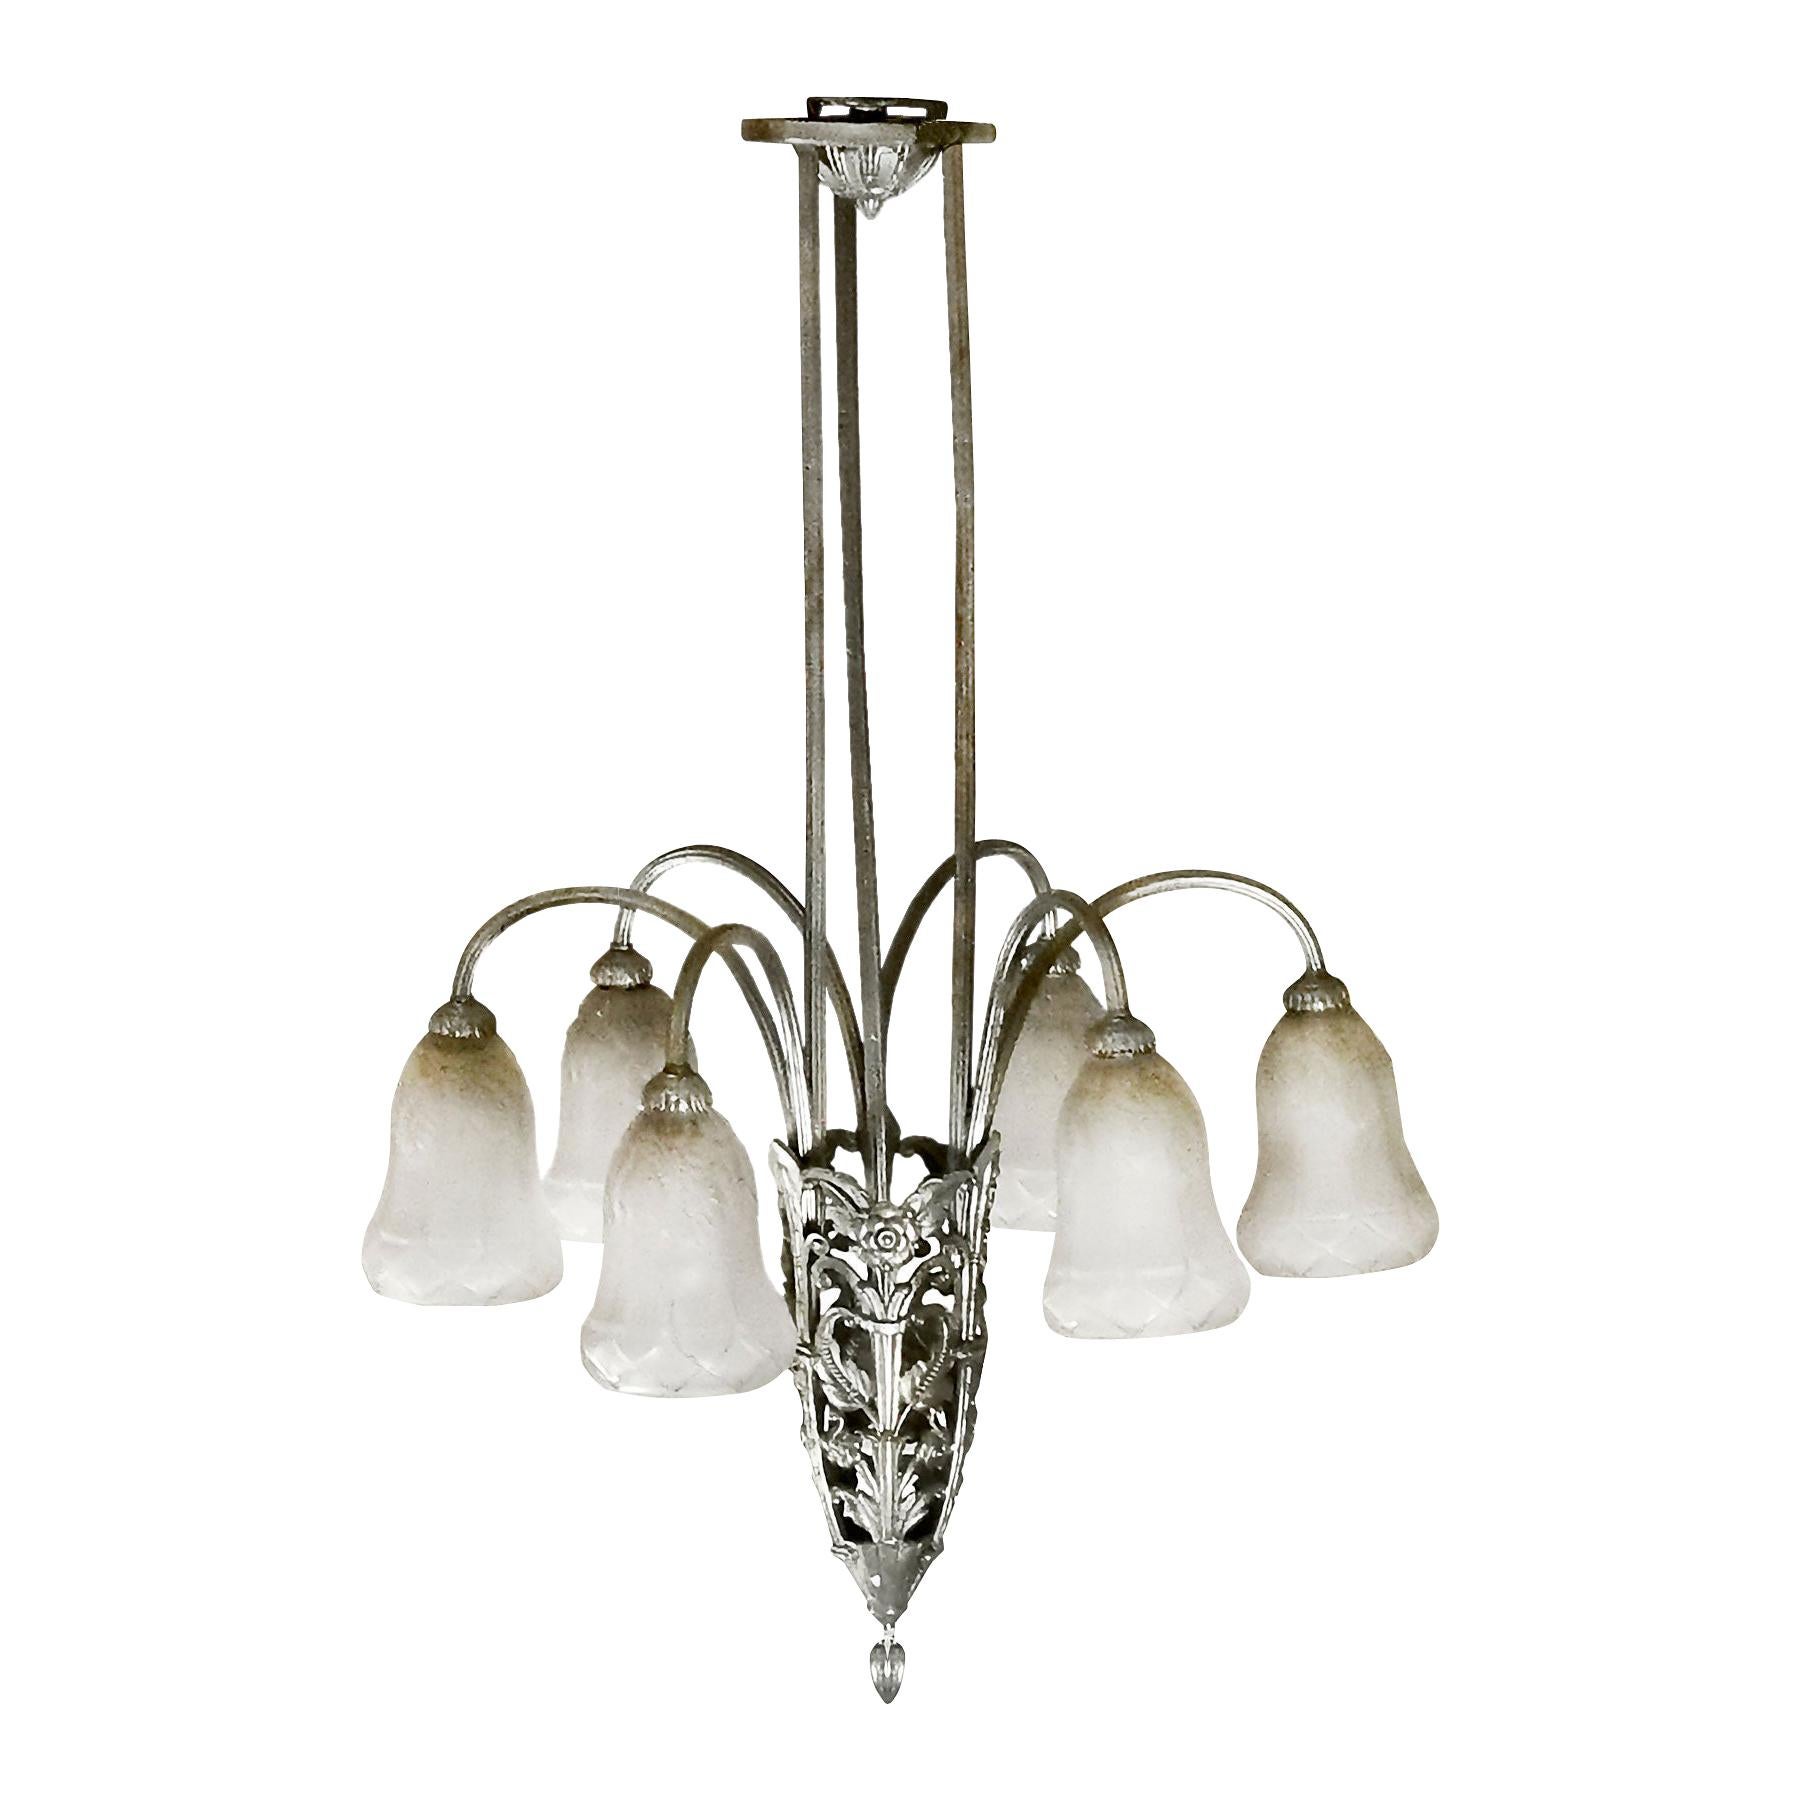 1930s Art Deco Chandelier, Six Branches, Silvered Bronze, Glass - France For Sale